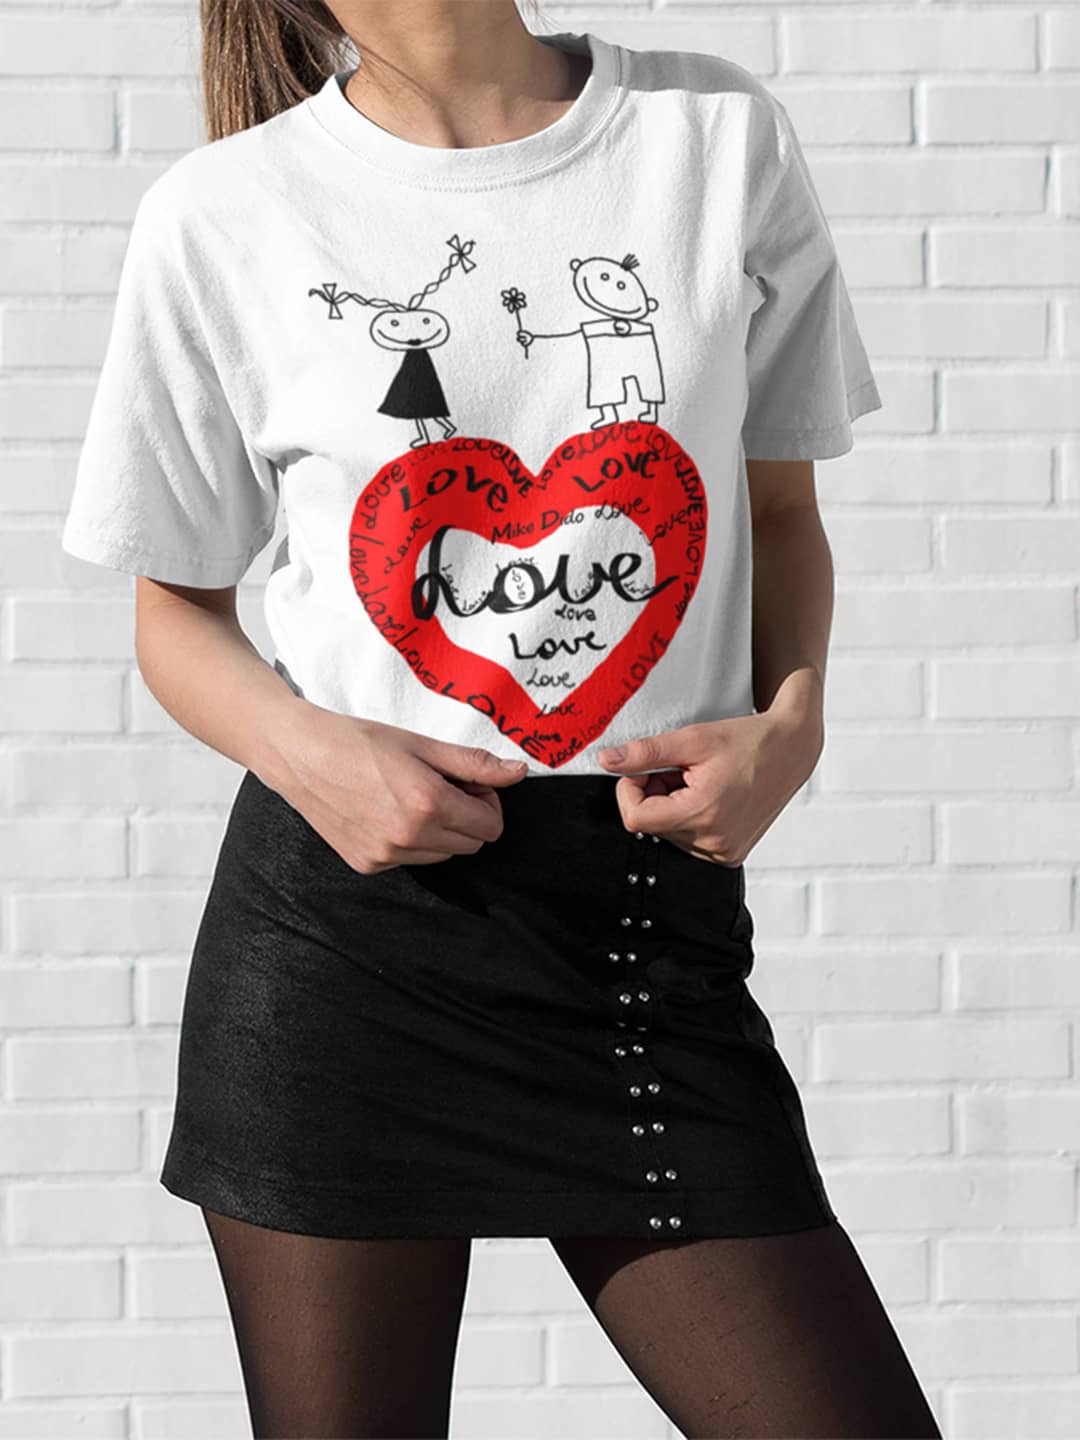 White And Red Graphic Tee Love Heart He She by Mike Dido